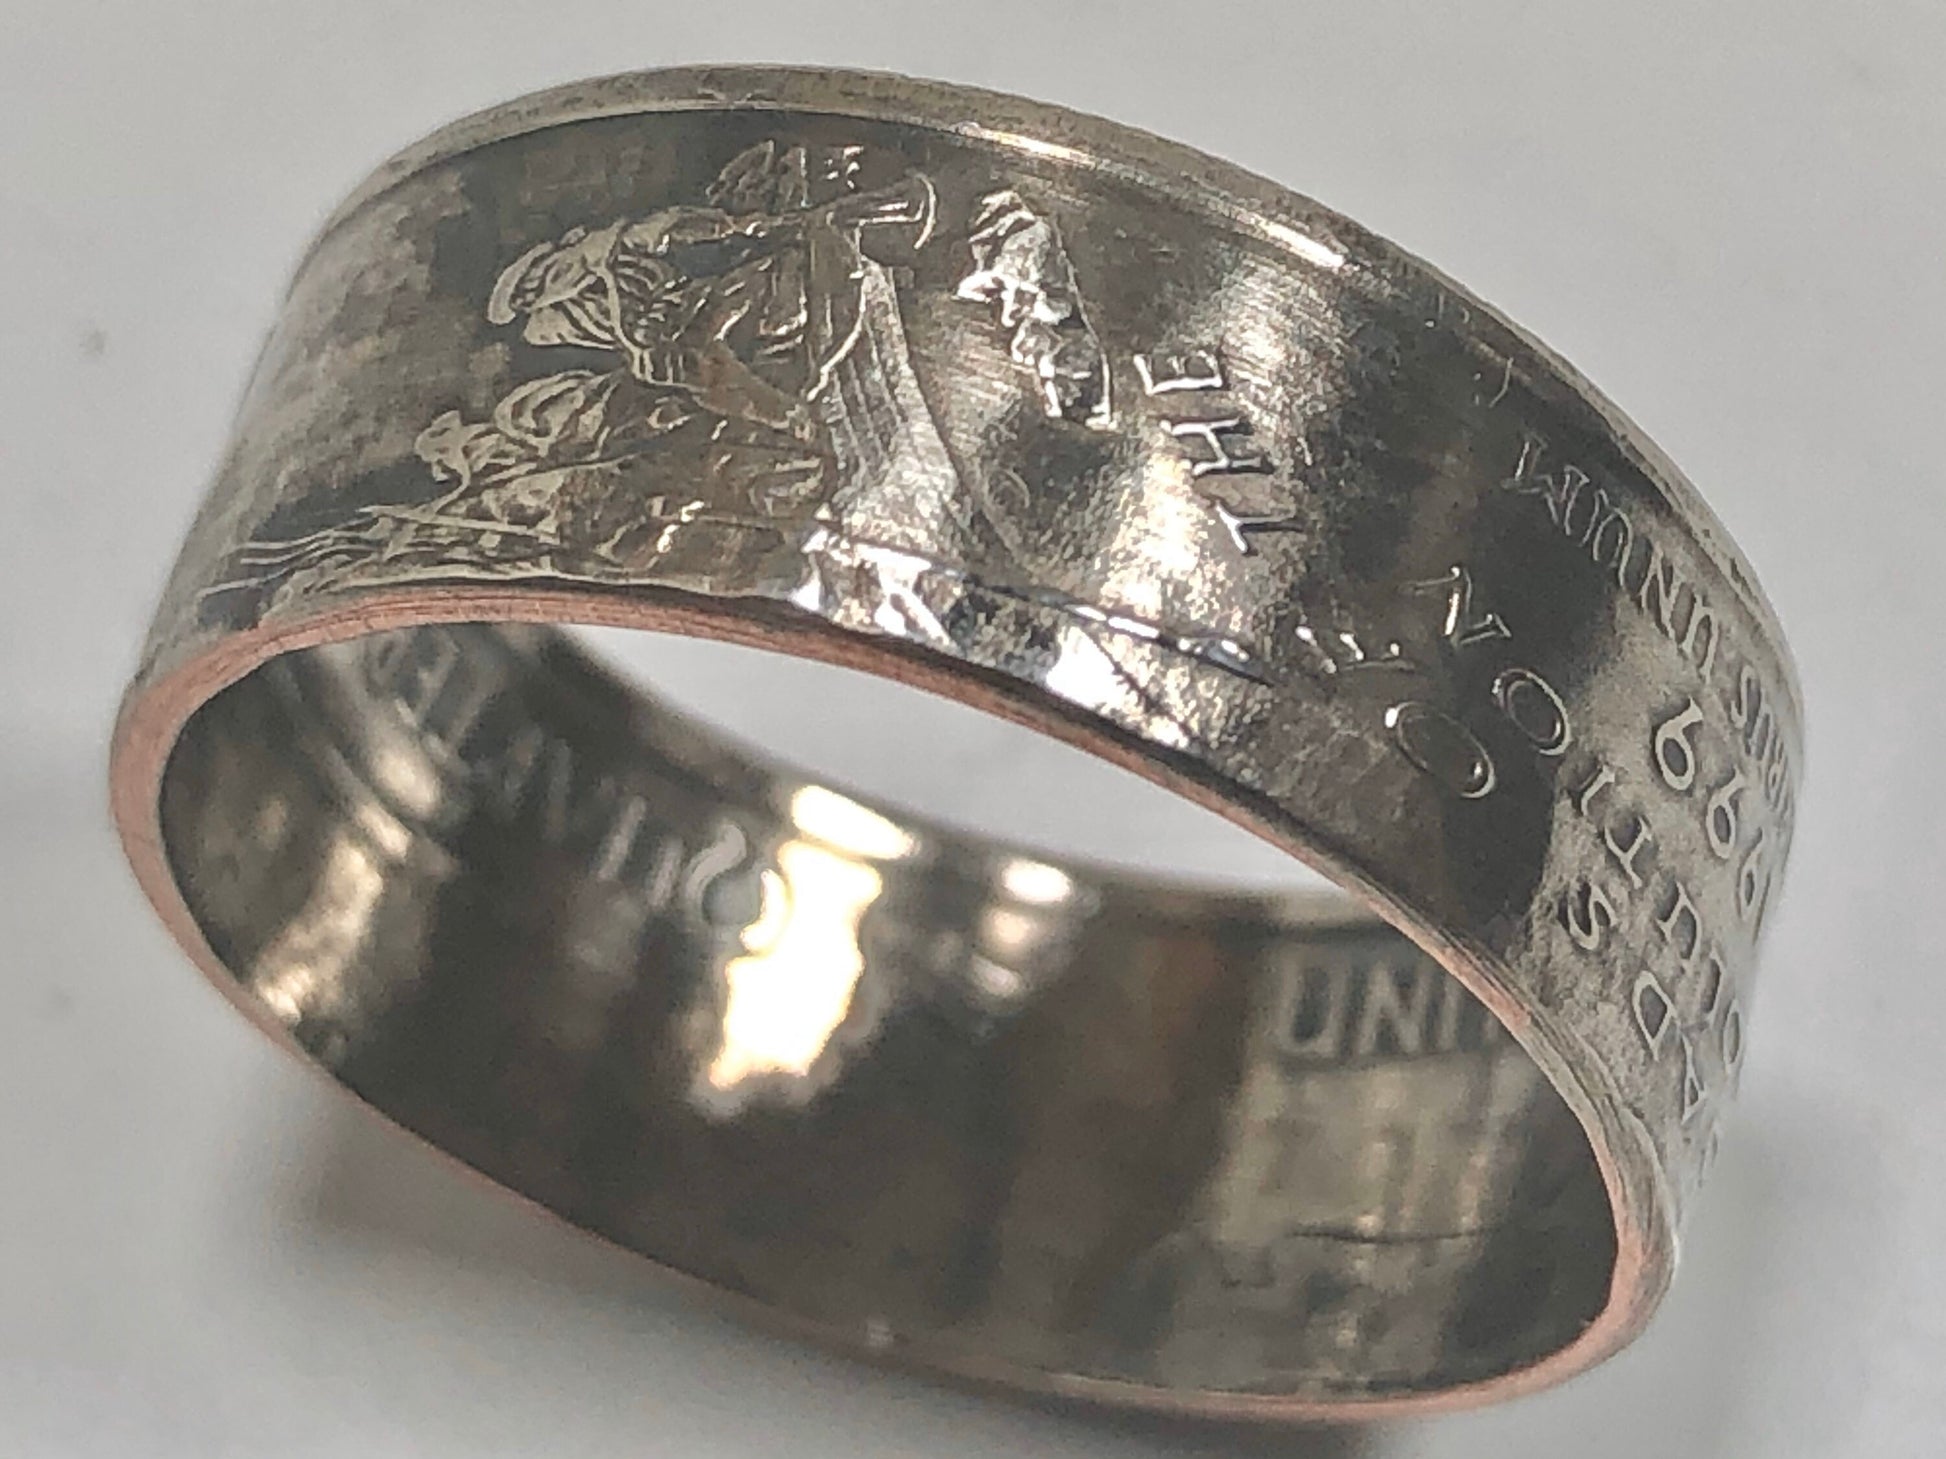 New Jersey Ring State Quarter Coin Ring Hand Made